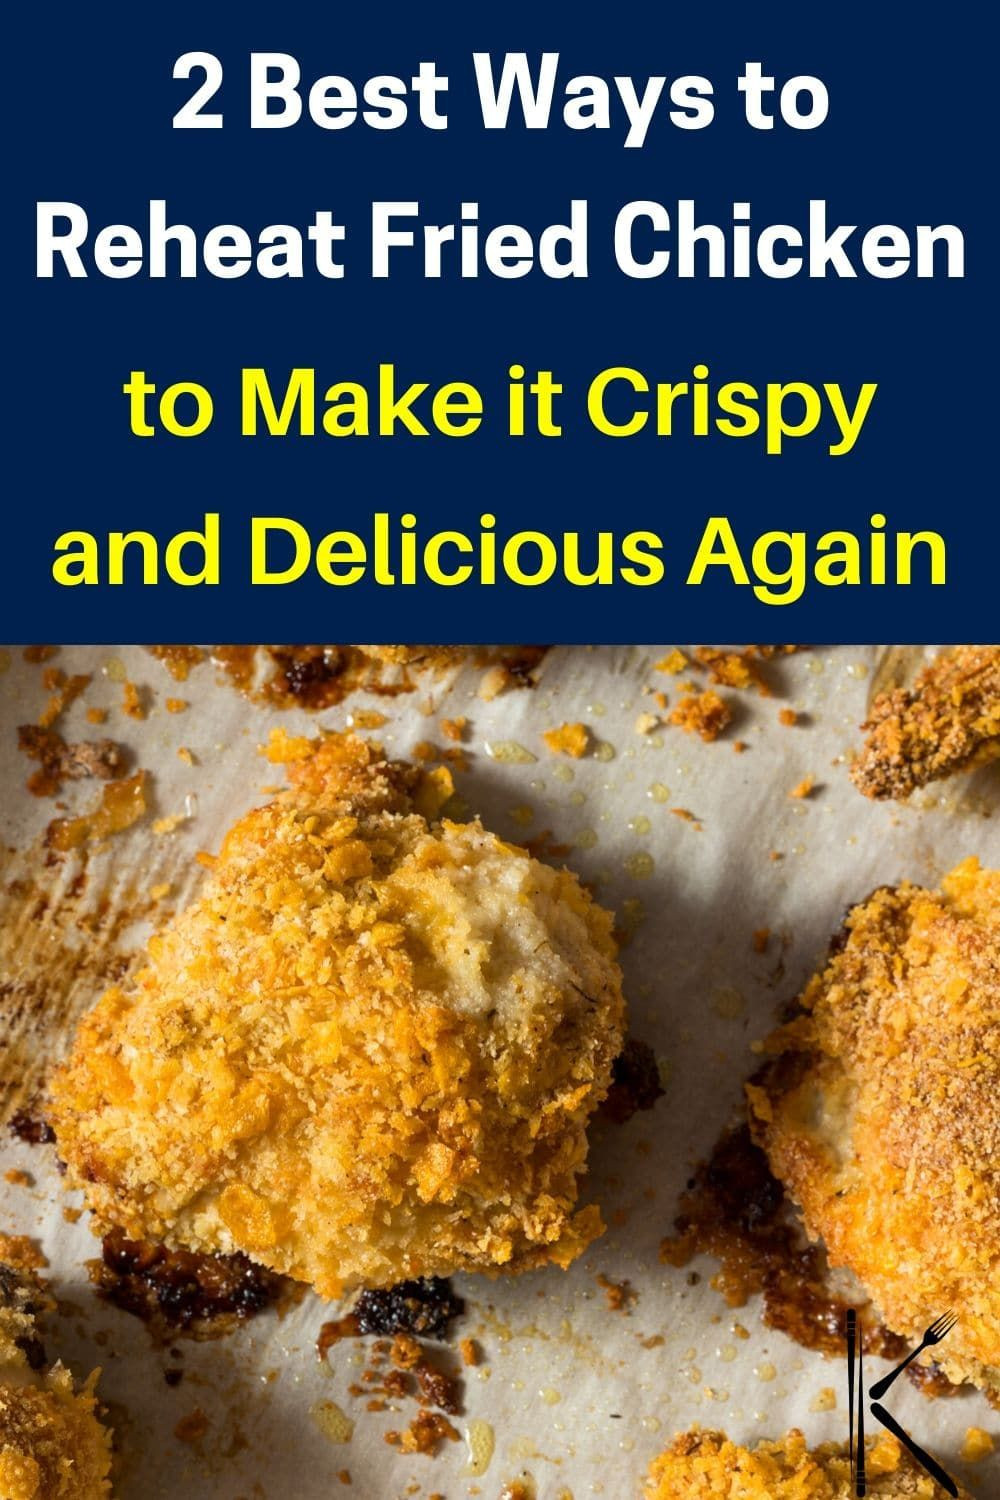 Reheat Fried Chicken In Oven
 How To Reheat Fried Chicken in 2020